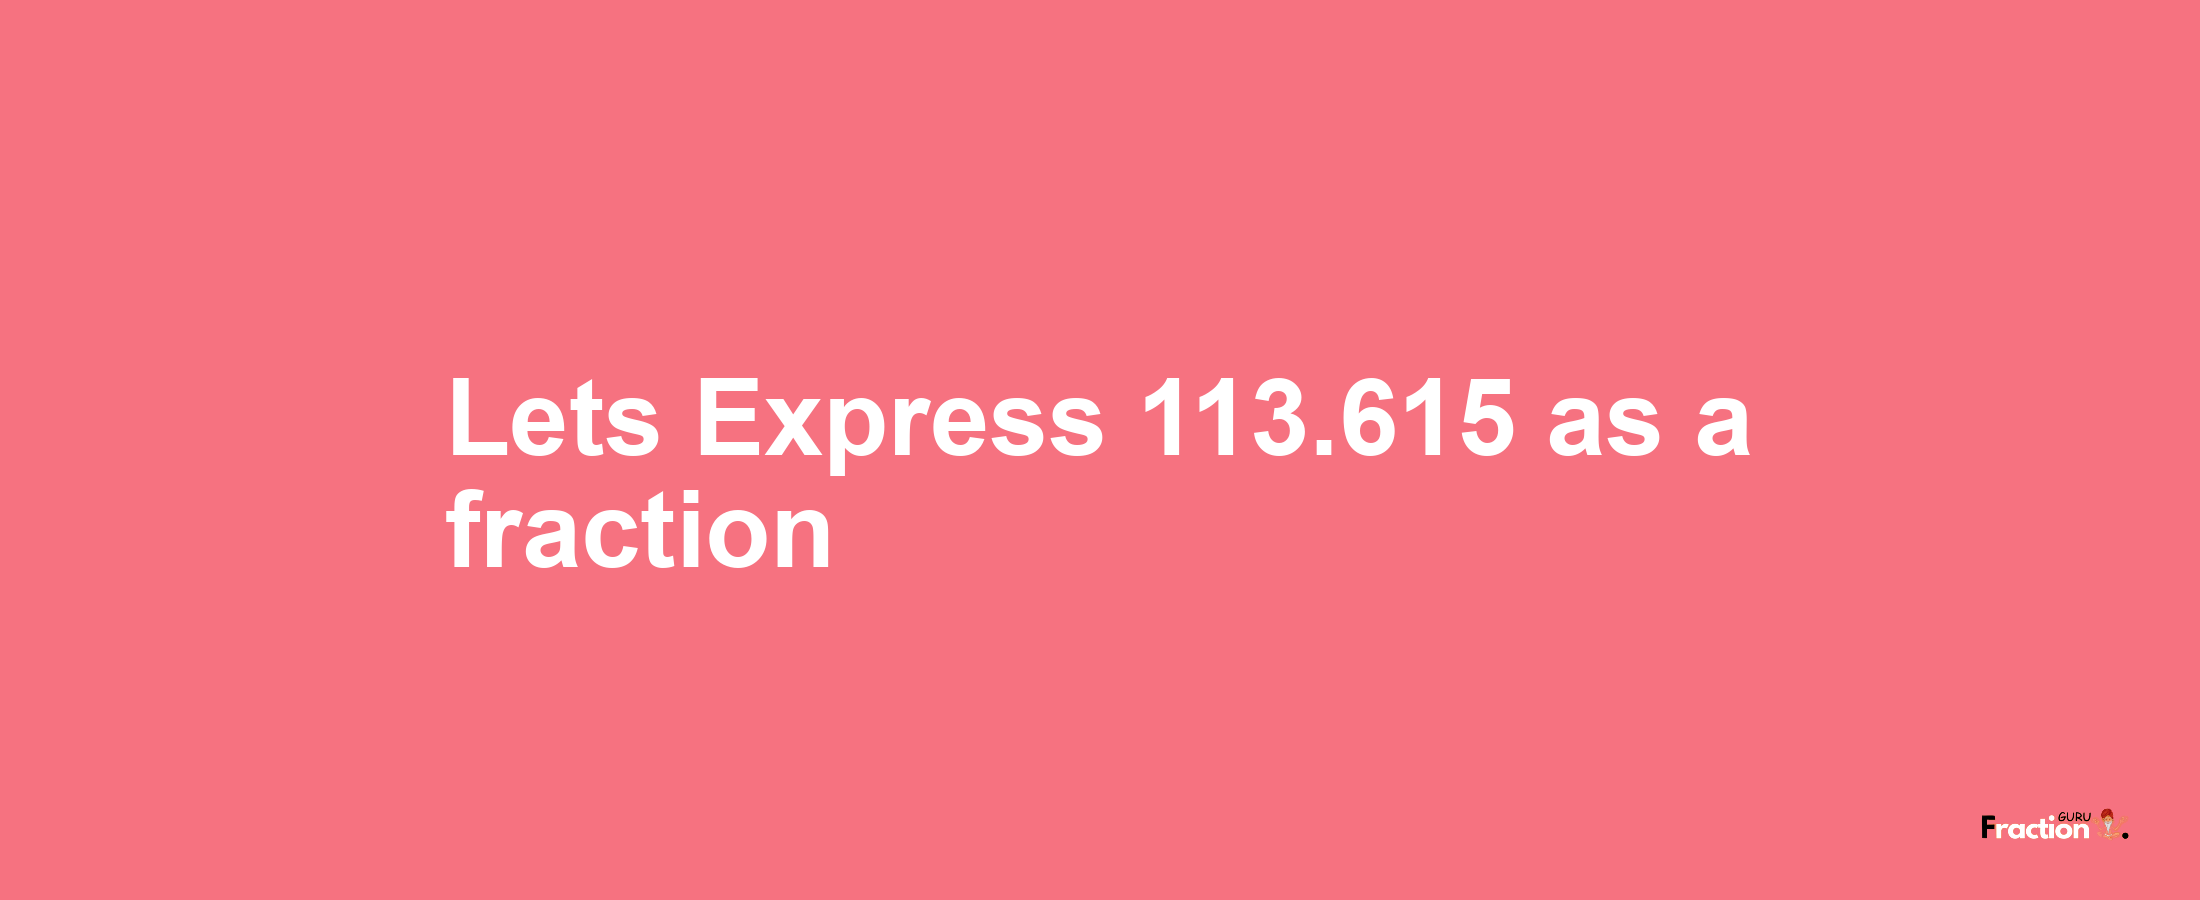 Lets Express 113.615 as afraction